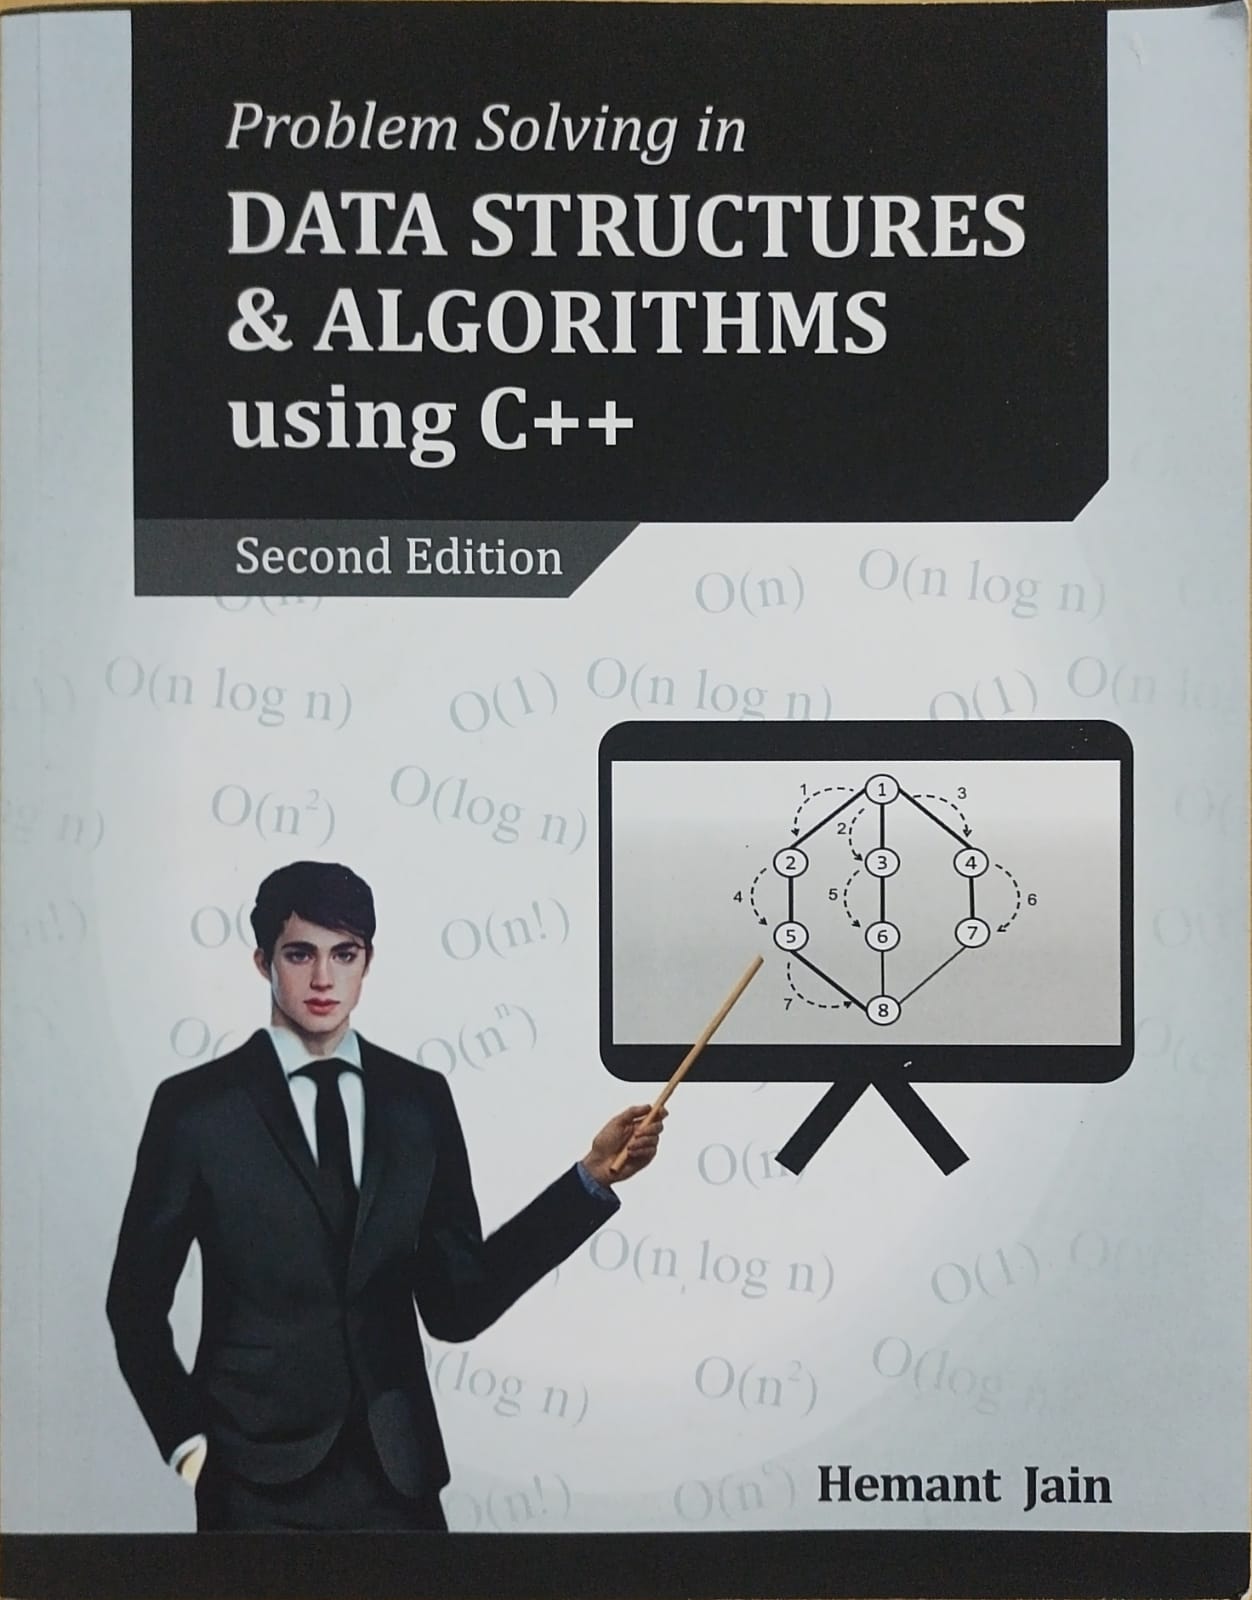 Problem solving in data stuctures & algorithms using c++ 2nd edition